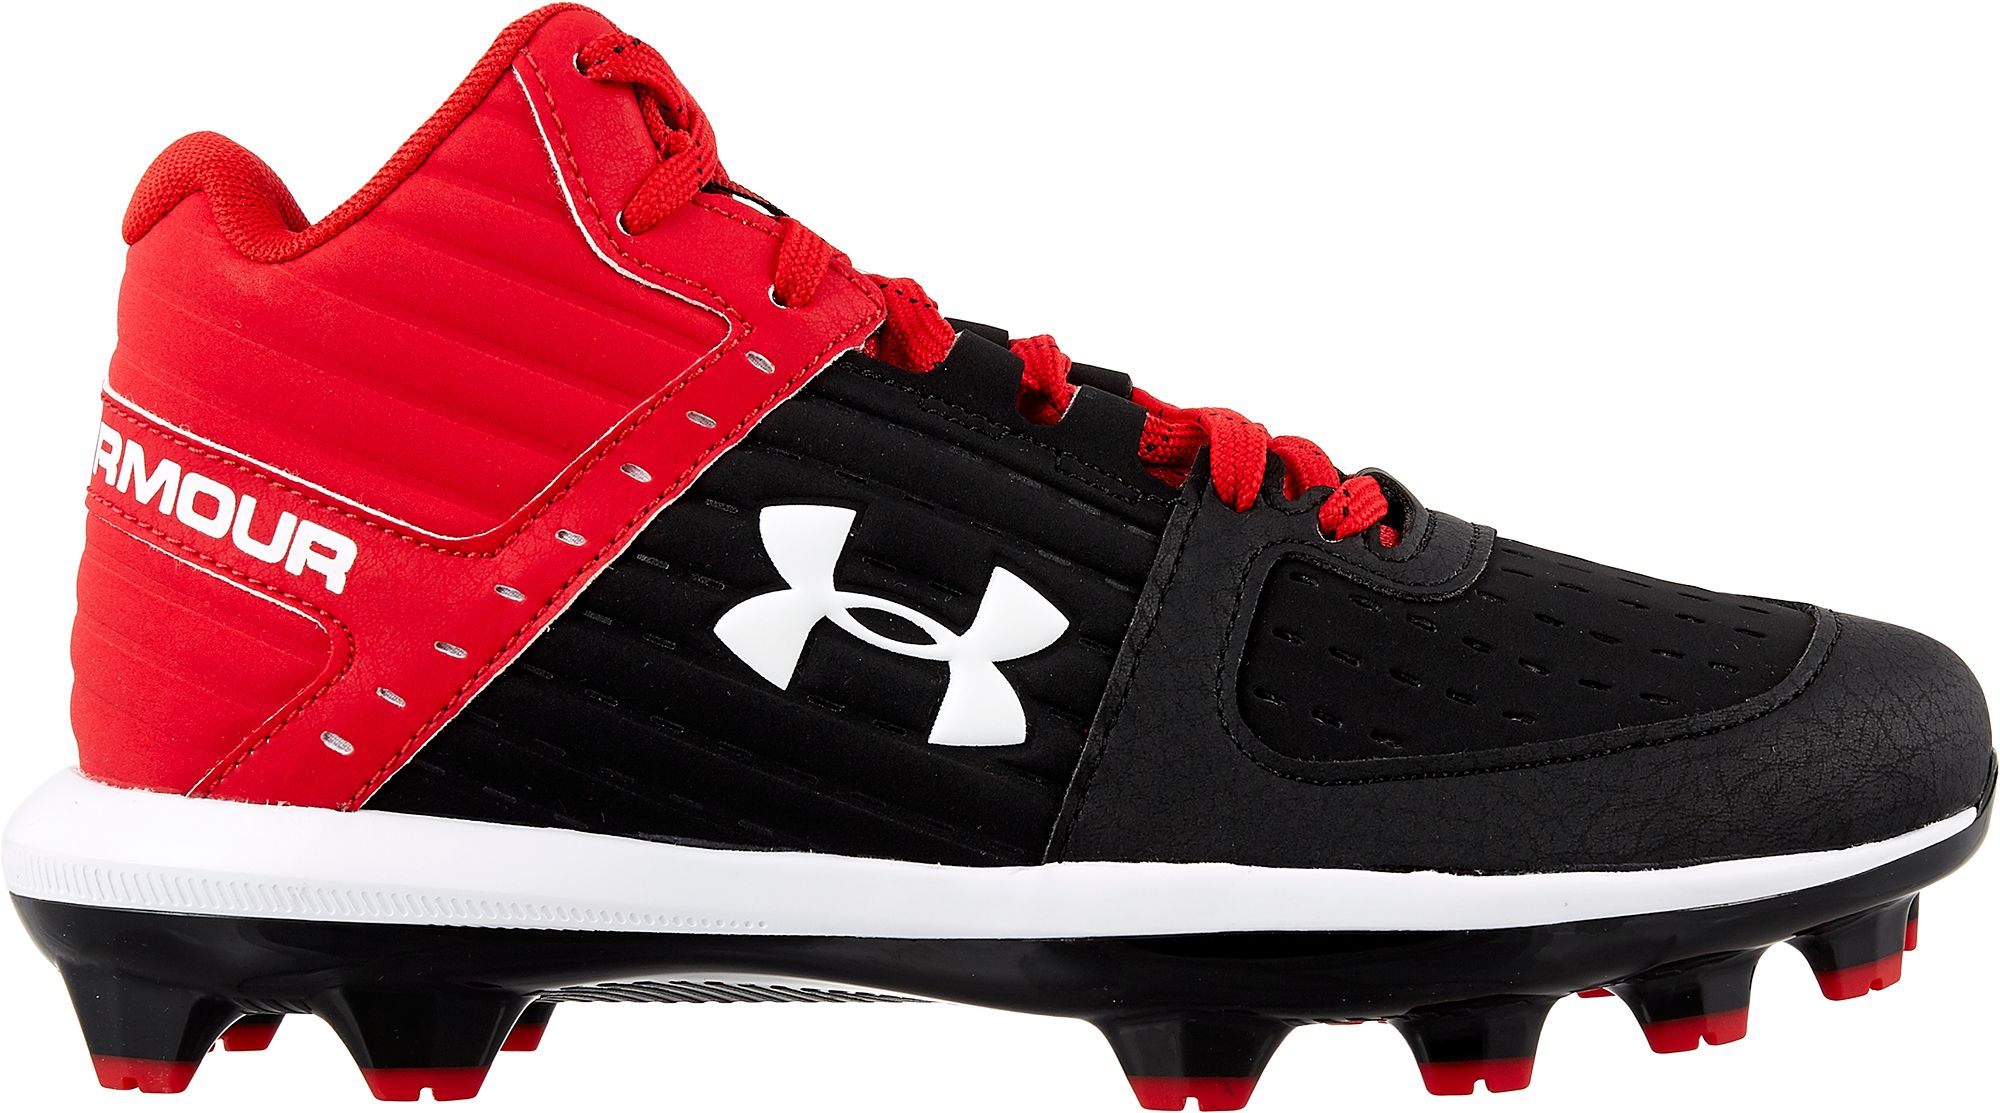 red white and blue under armour cleats